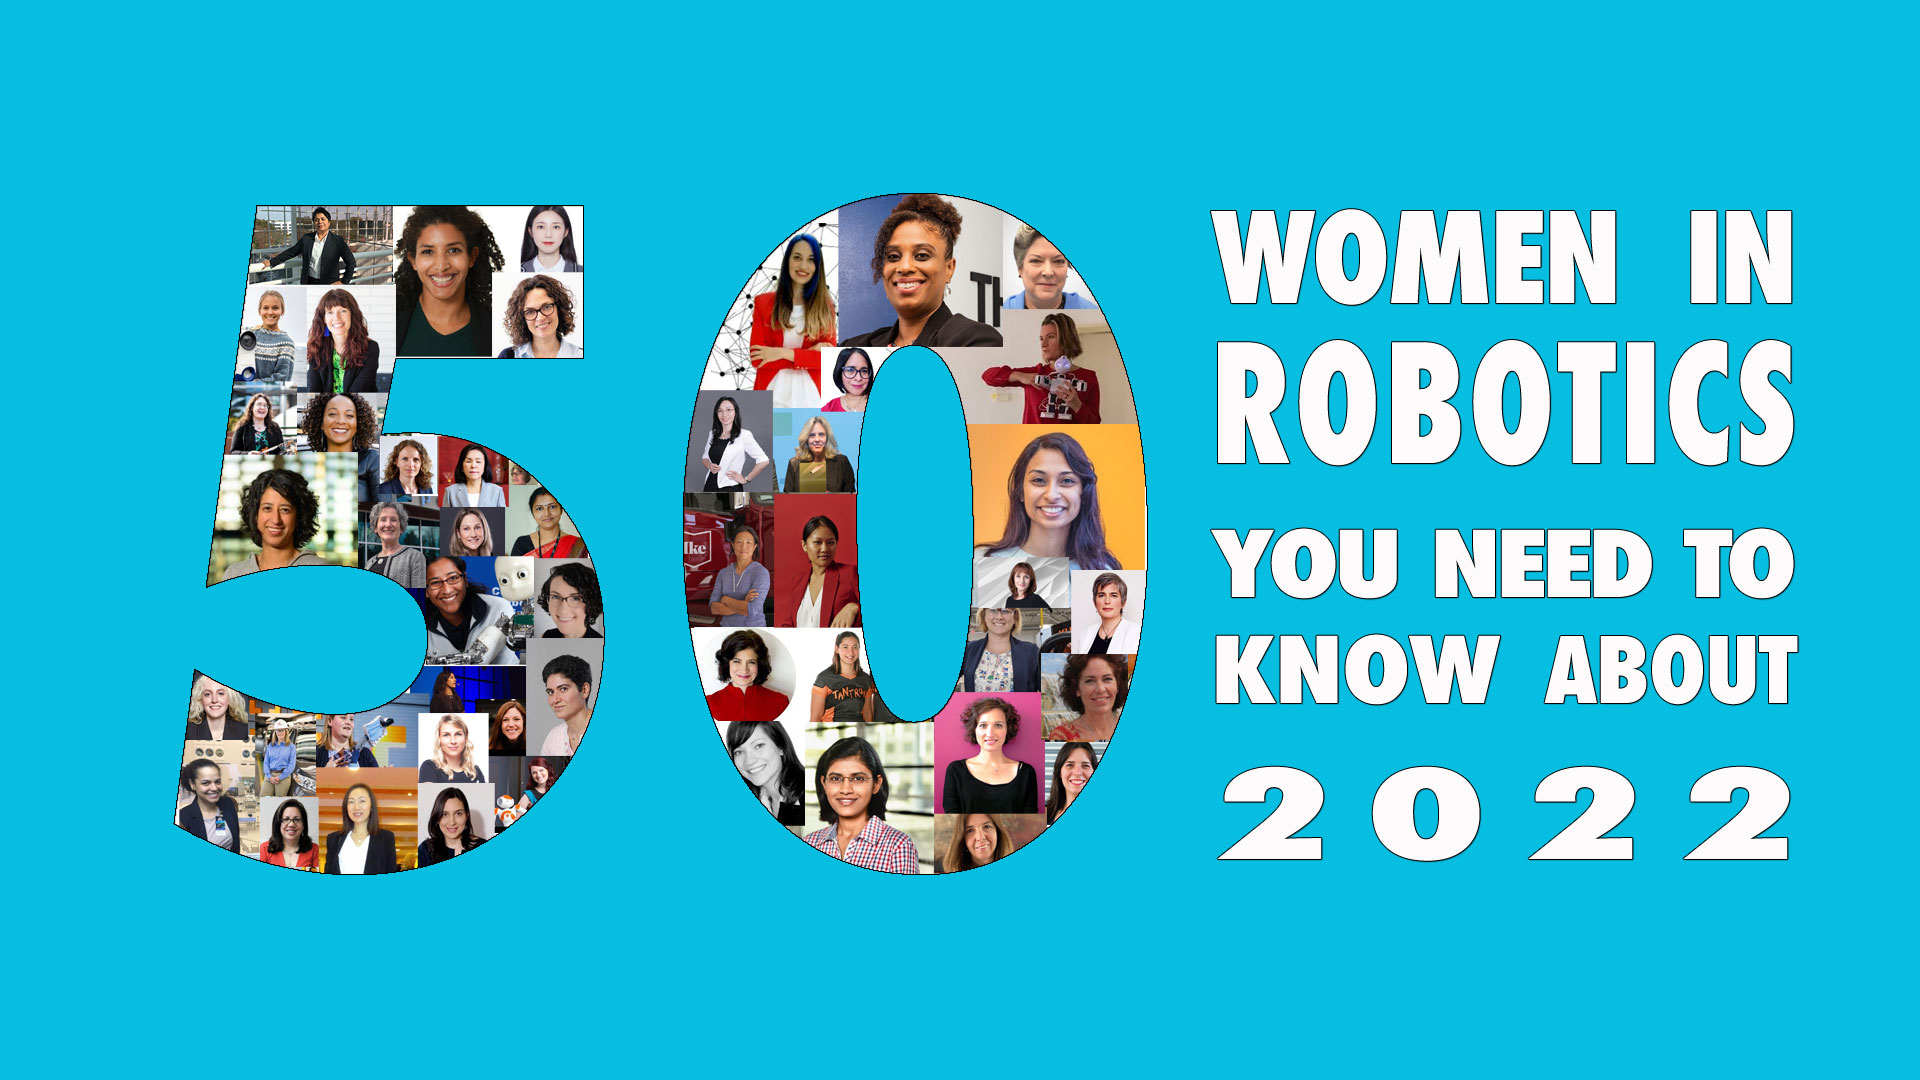 Women in Robotics you need to know about 2022